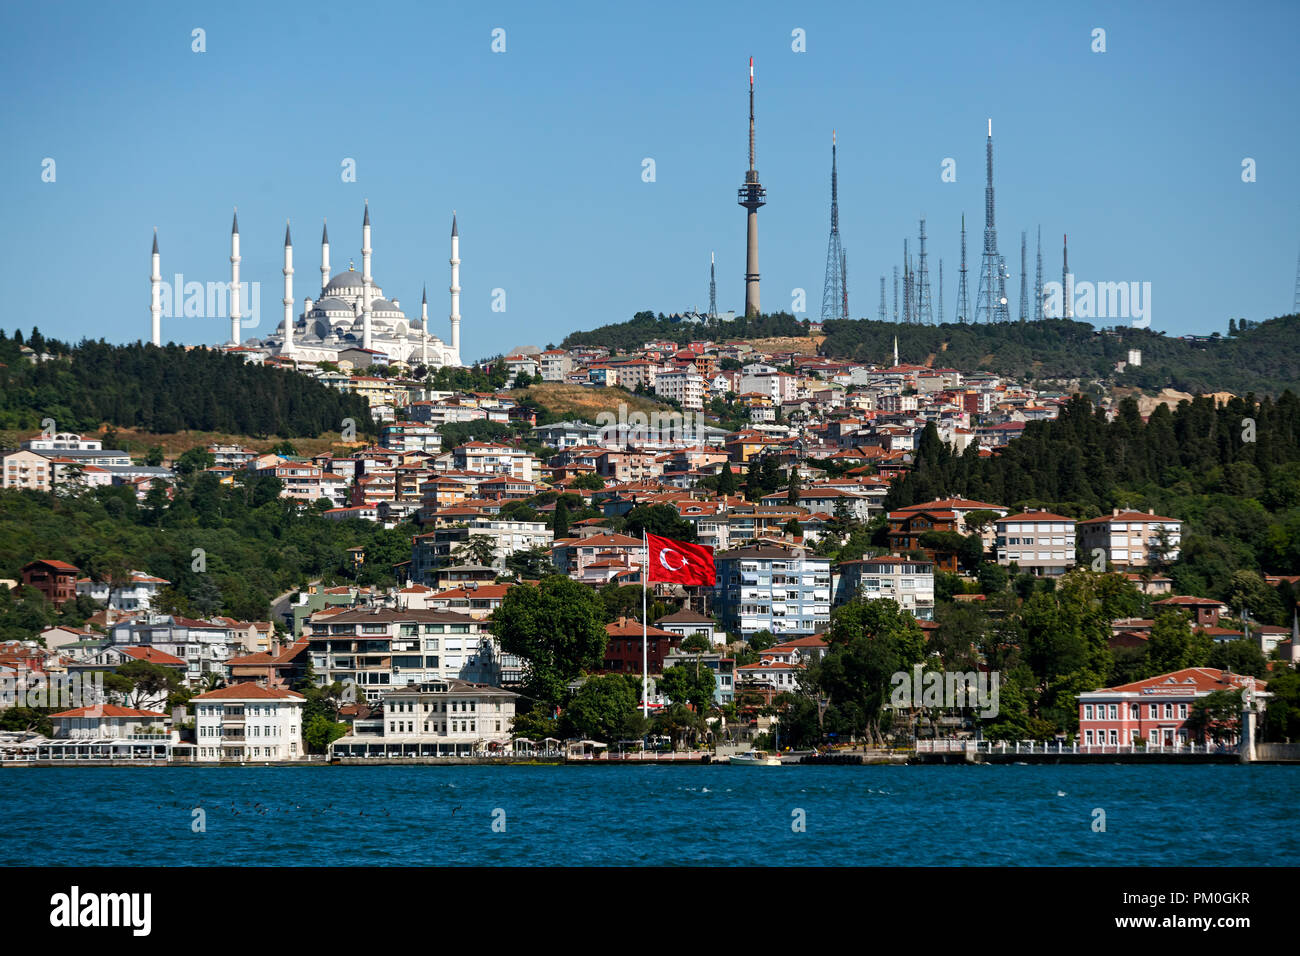 Camlica hill and mosque Stock Photo